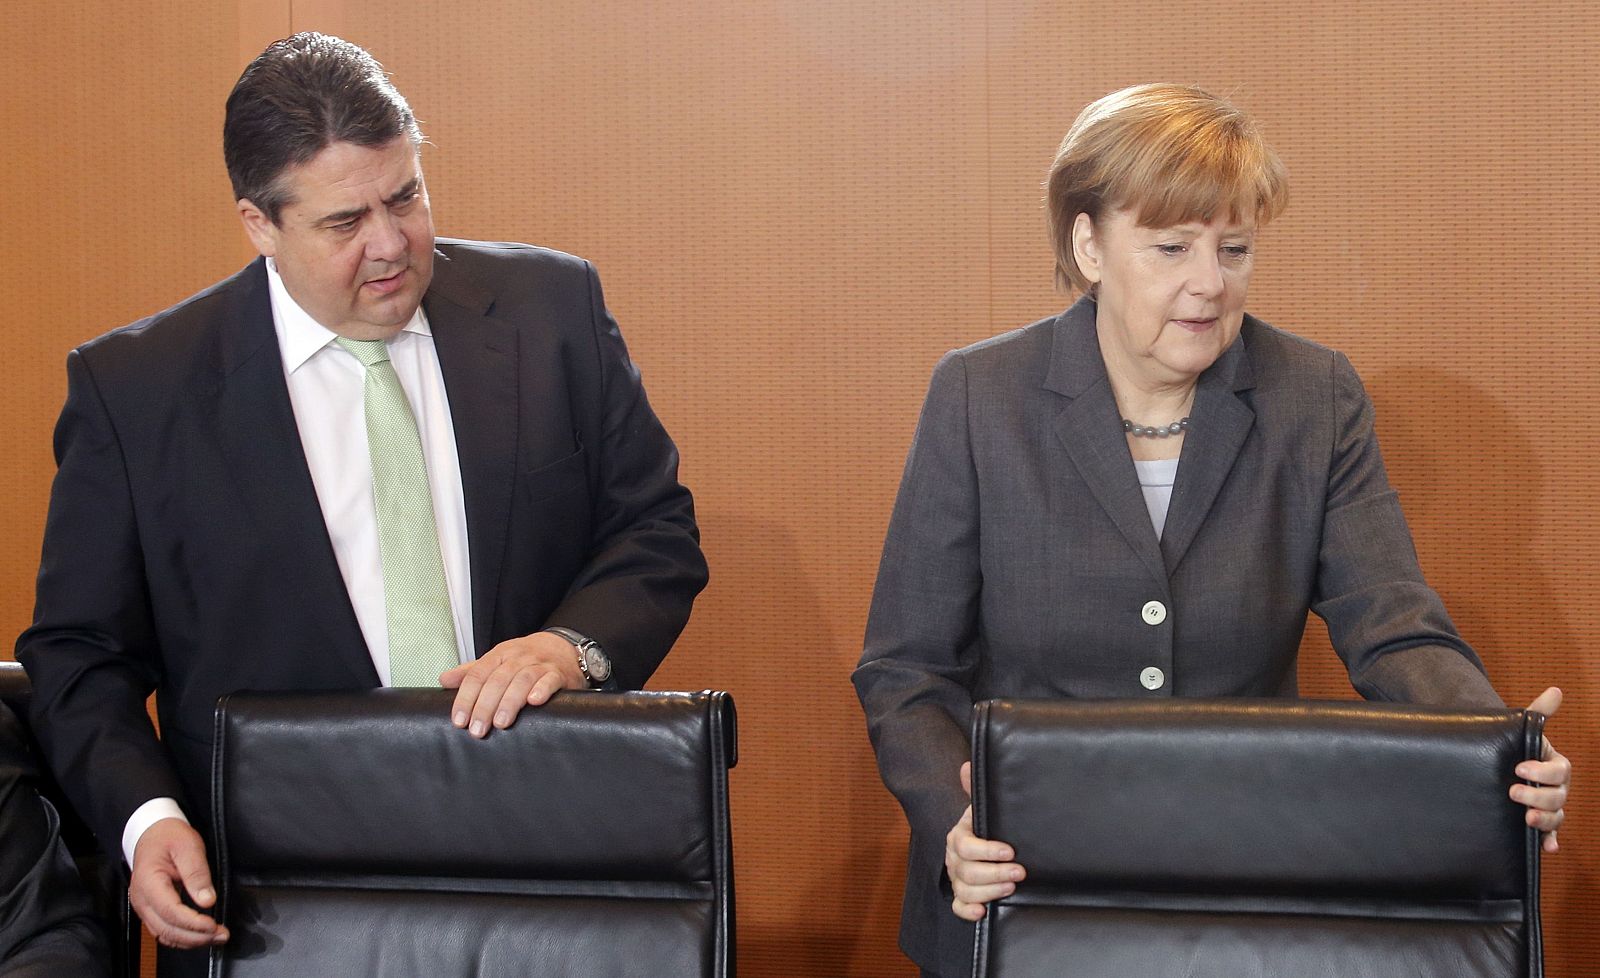 German Chancellor Merkel and Economy Minister Gabriel arrive to attend a cabinet meeting at the Chancellery in Berlin